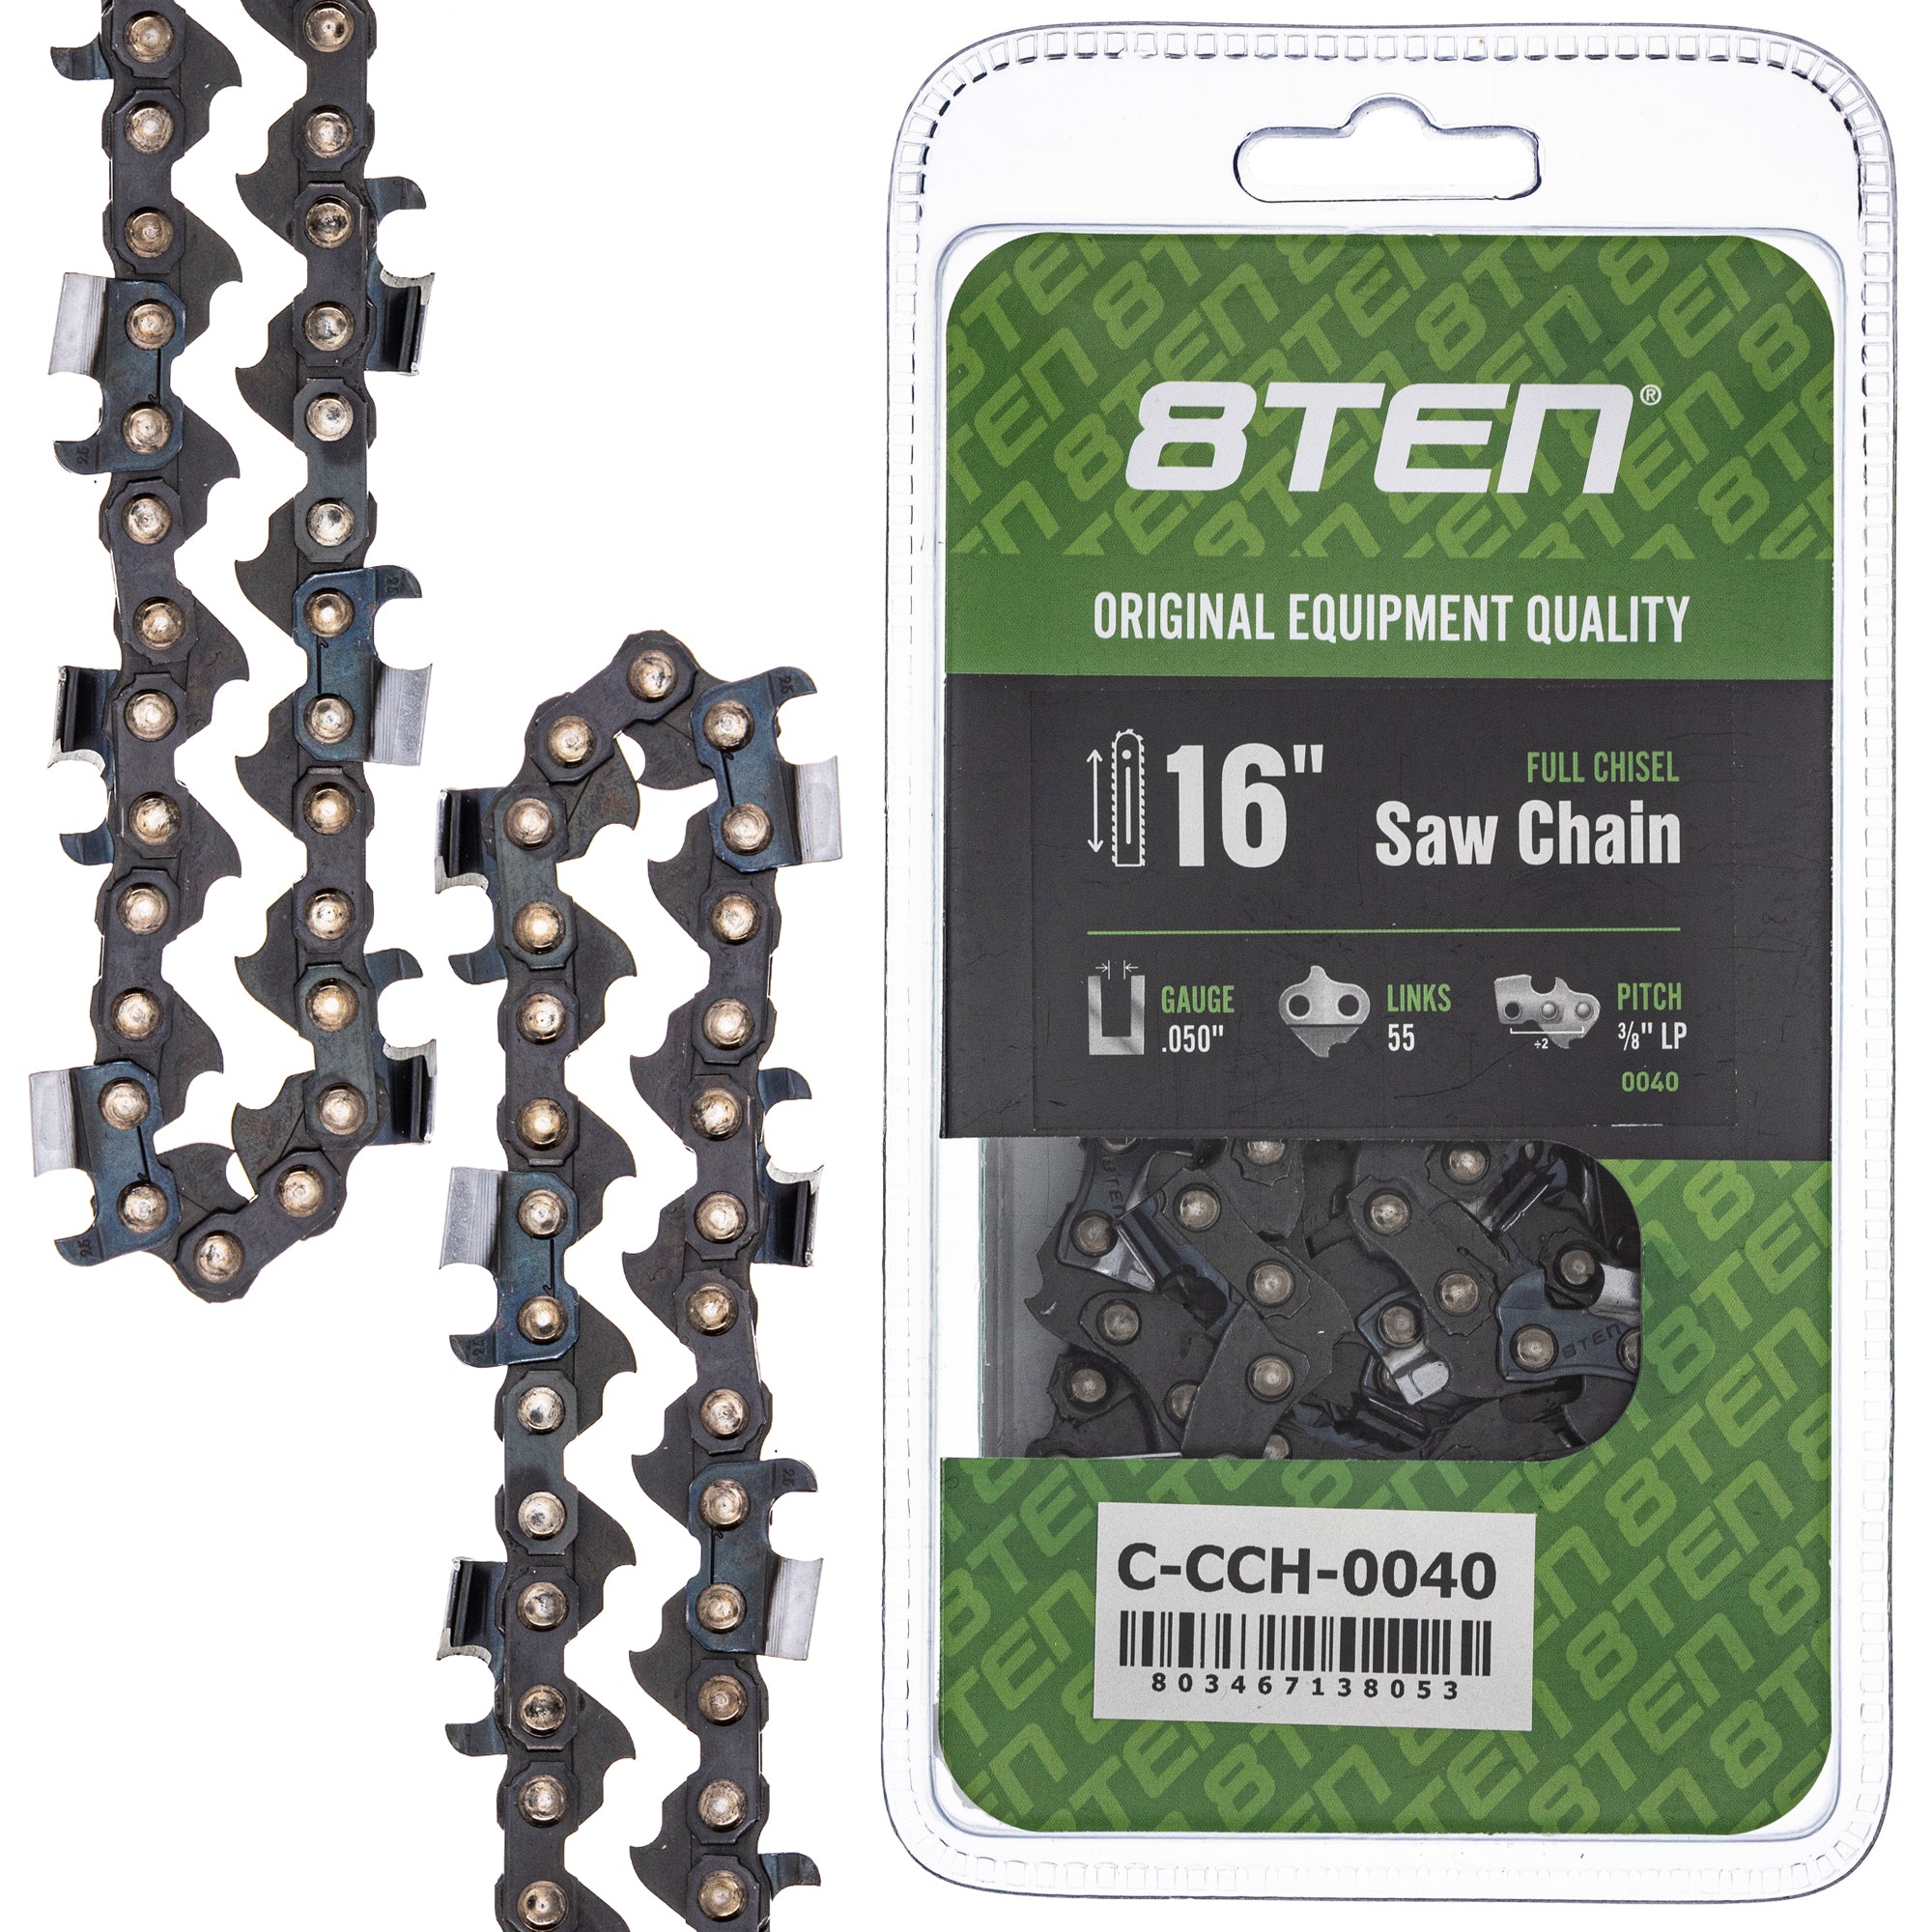 Chainsaw Chain 16 Inch .050 3/8 LP 55DL for zOTHER Stens Oregon MSE MS Mac Lumberjack 8TEN 810-CCC2262H